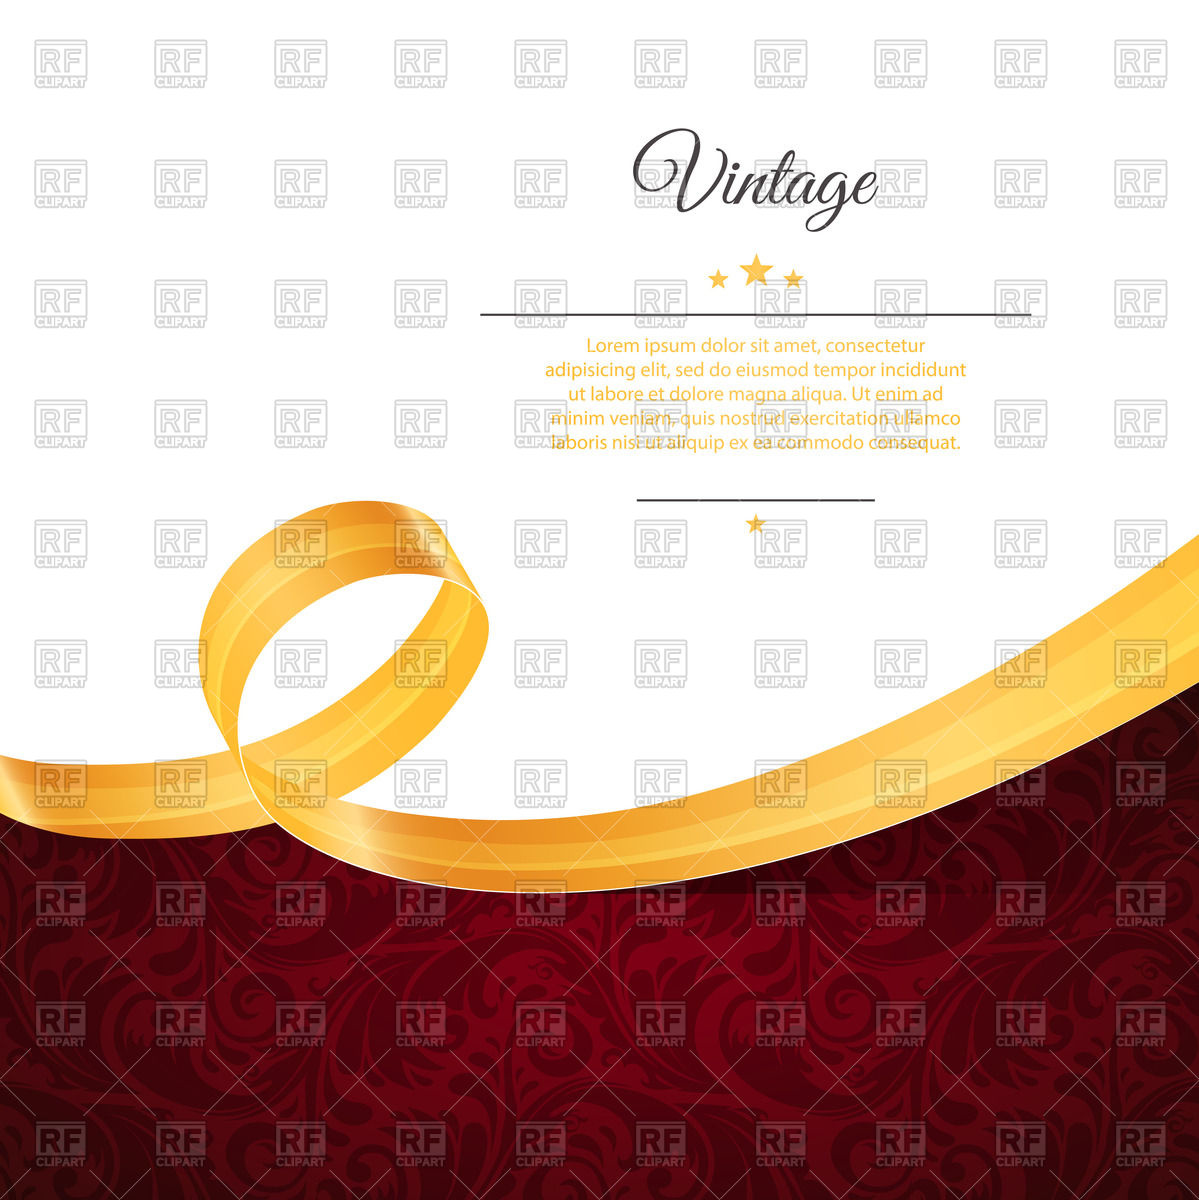 Vintage Template With Burgundy Ornament Golden Ribbon And Place For